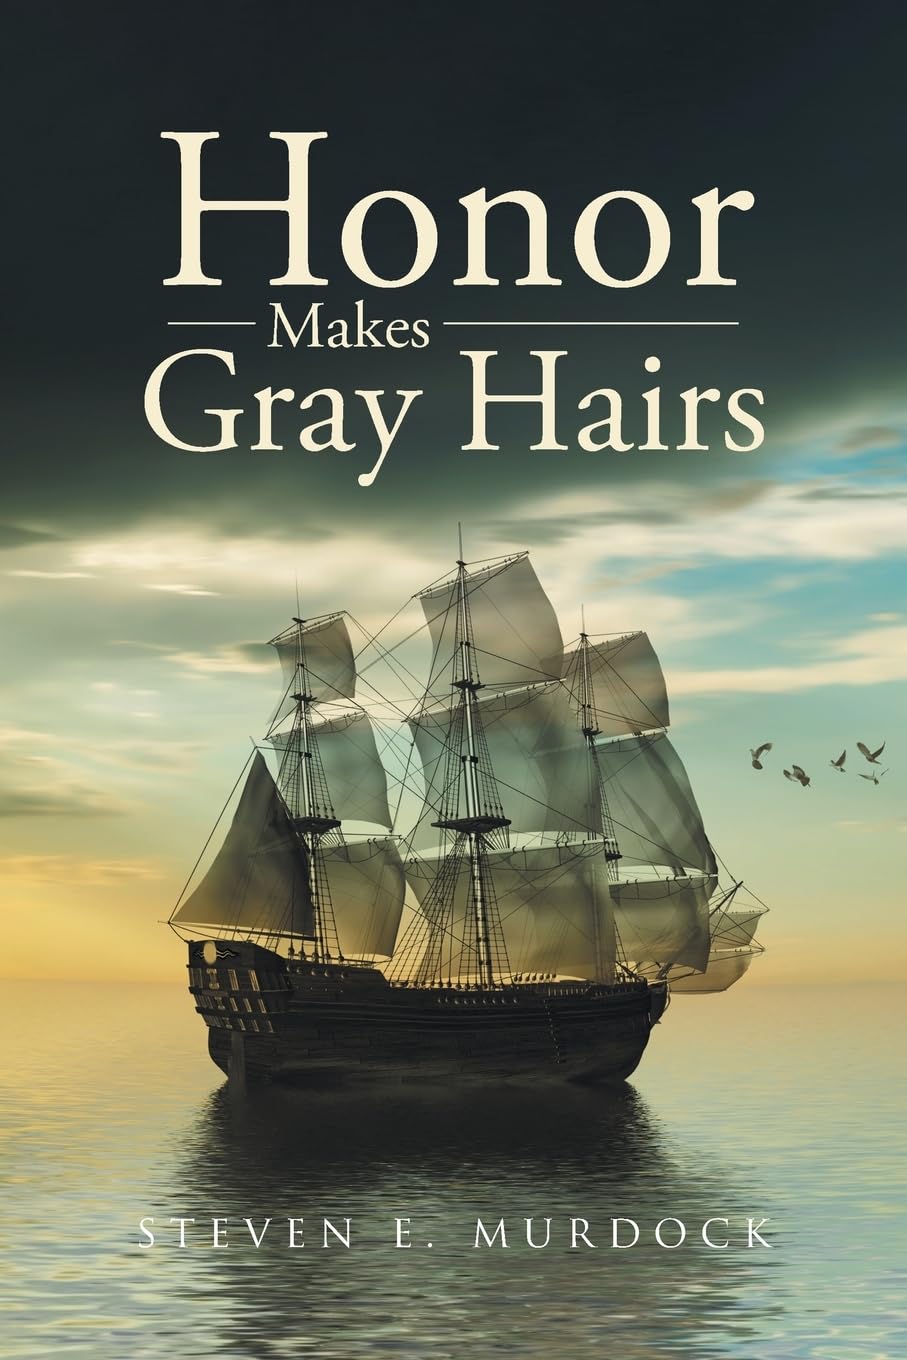 New Biographical Novel "Honor Makes Gray Hairs" Explores Mental Health and Family Dynamics in American History